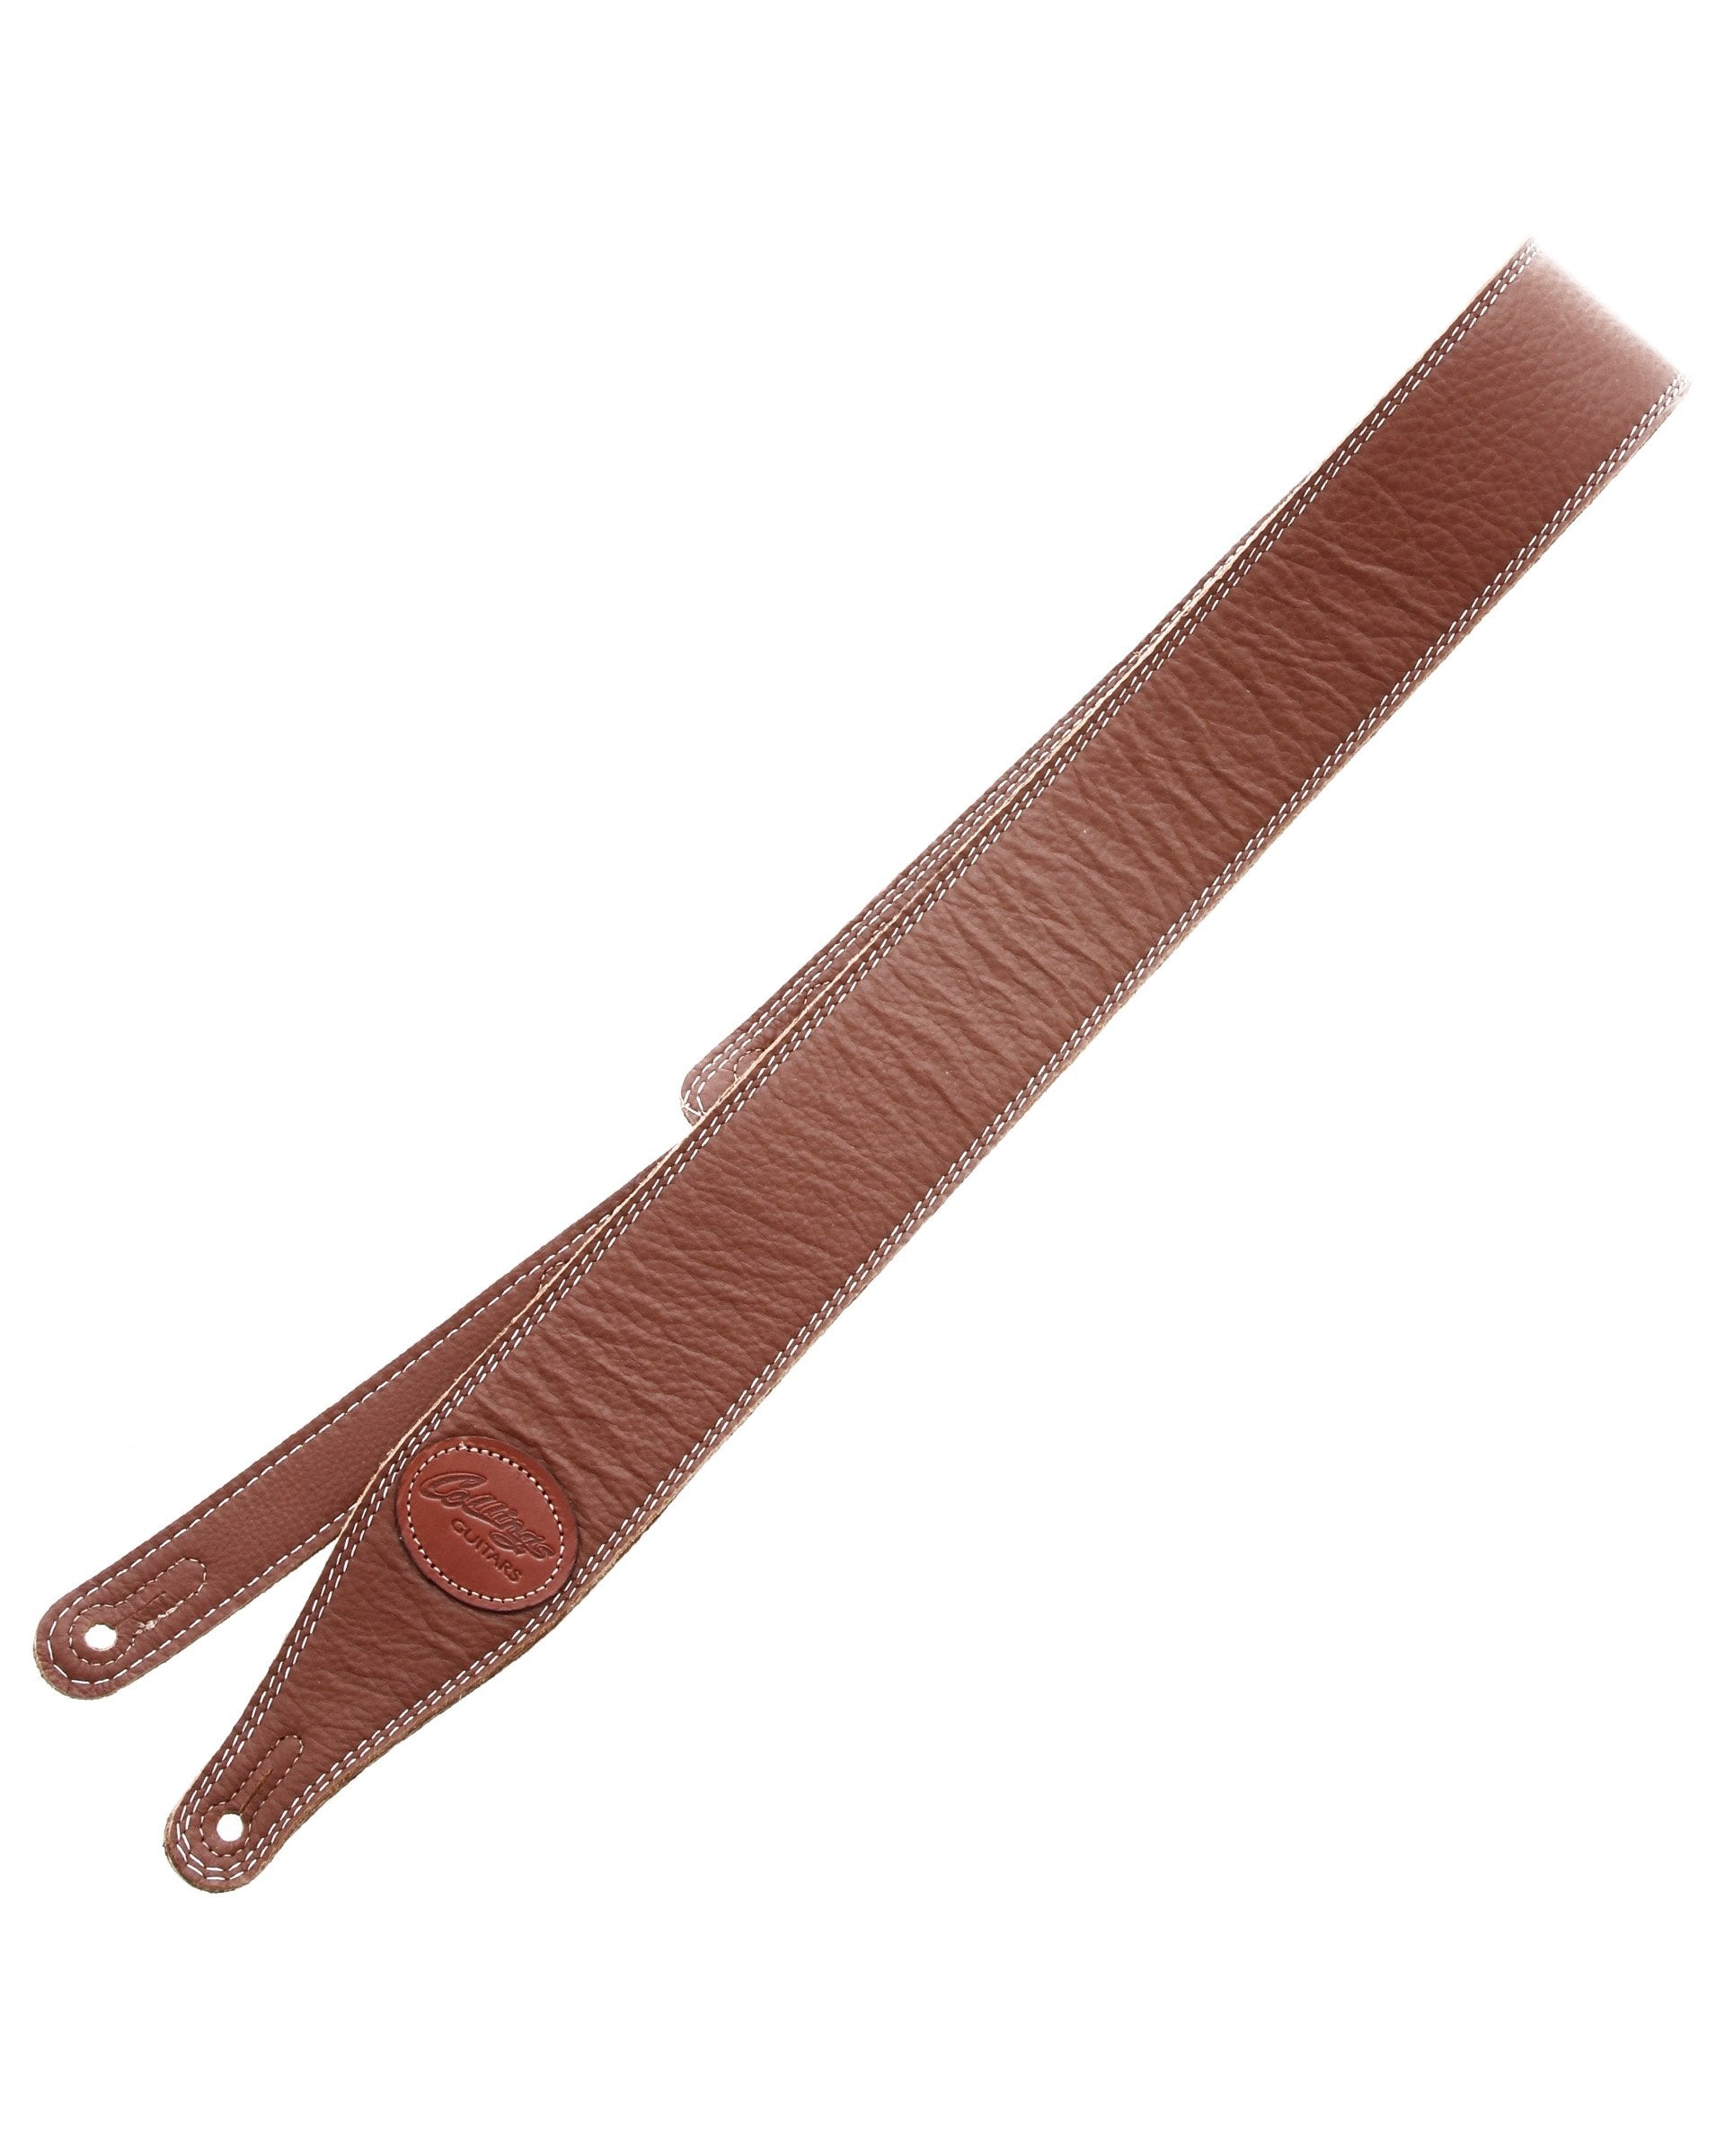 Image 1 of Collings Guitar Strap, Brown - SKU# CGS7BRN : Product Type Accessories & Parts : Elderly Instruments